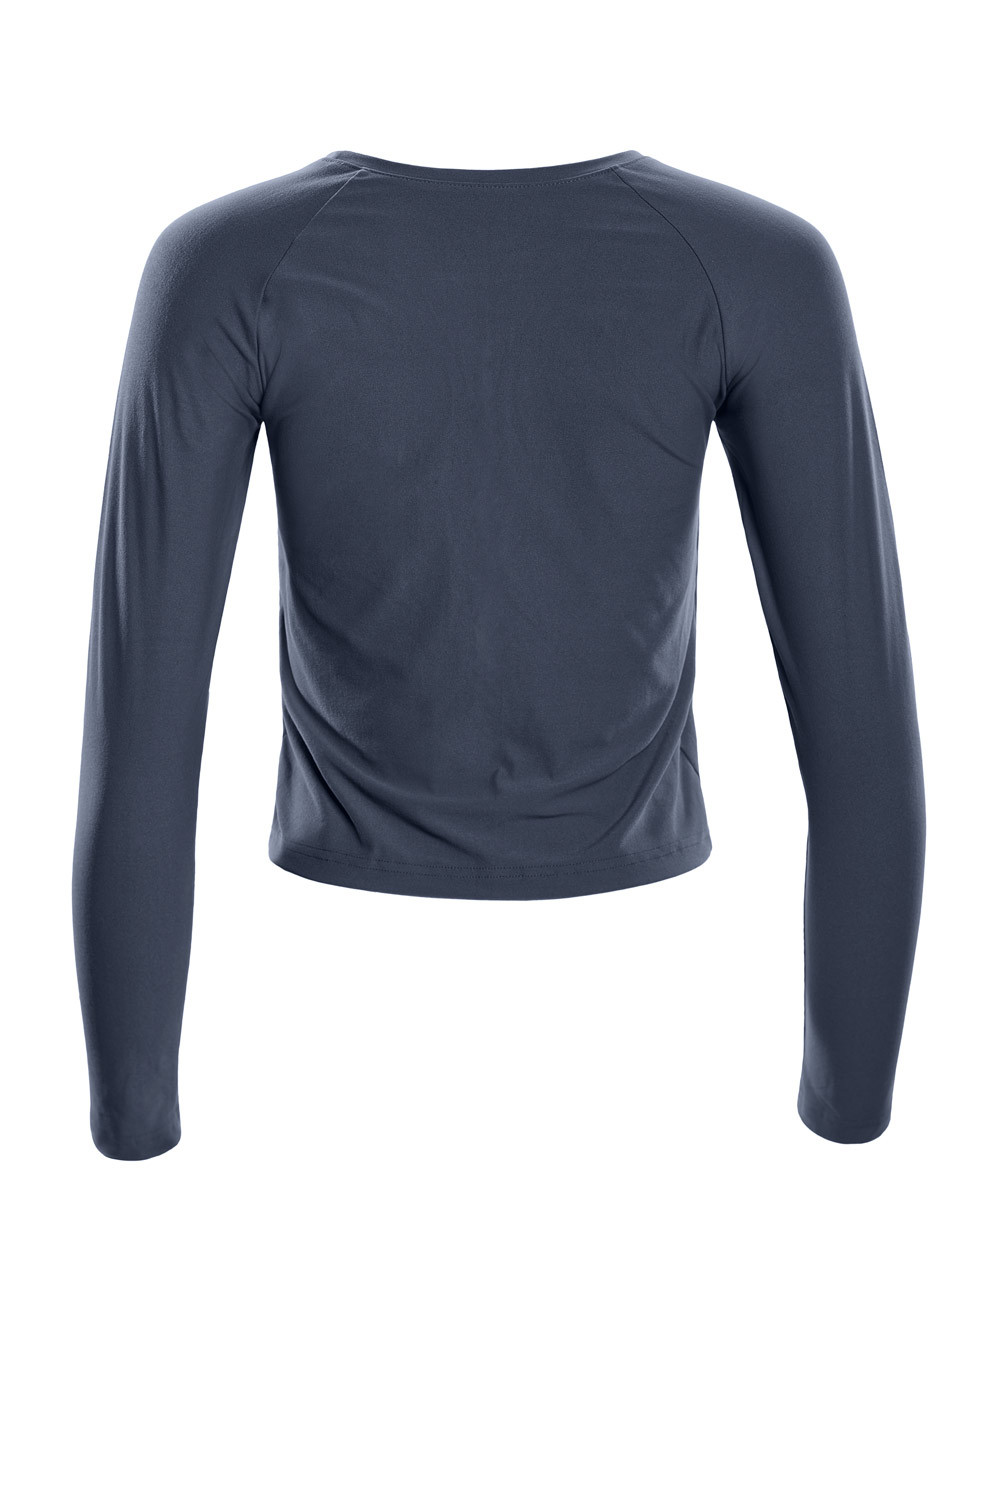 Functional Light and AET119LS, Soft Soft Top Sleeve Winshape Ultra Style Cropped anthrazit, Long